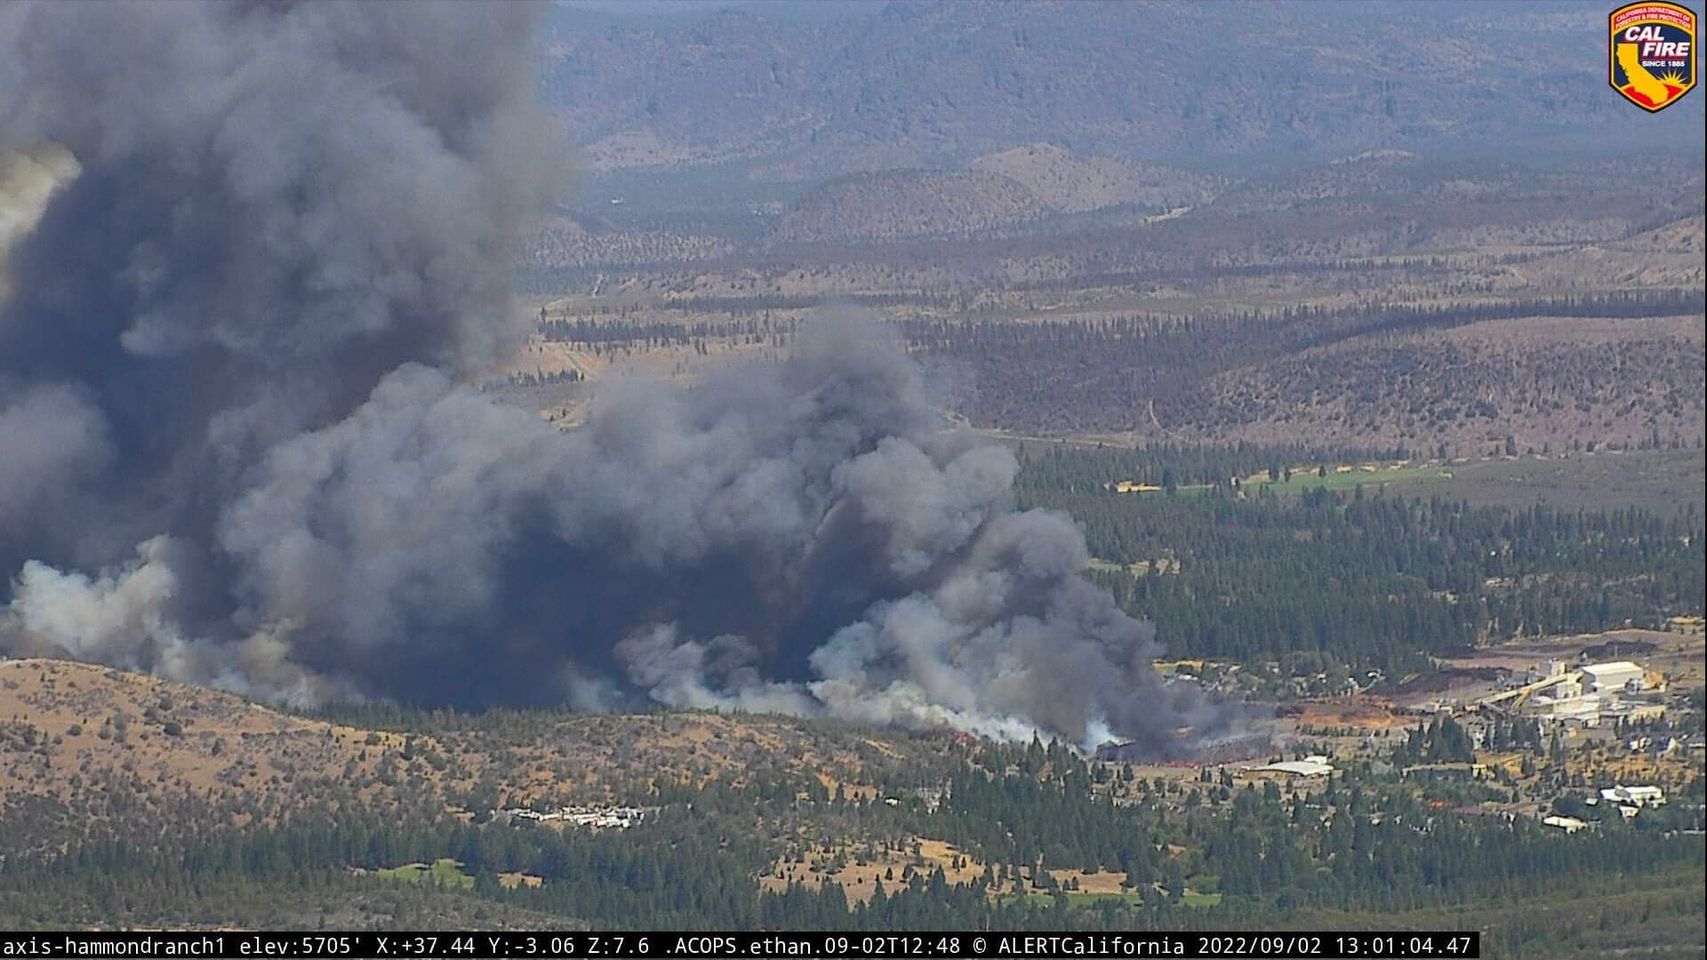 Watch: Structures destroyed in Lincoln Heights, Weed, Siskiyou County as mill fire spreads rapidly